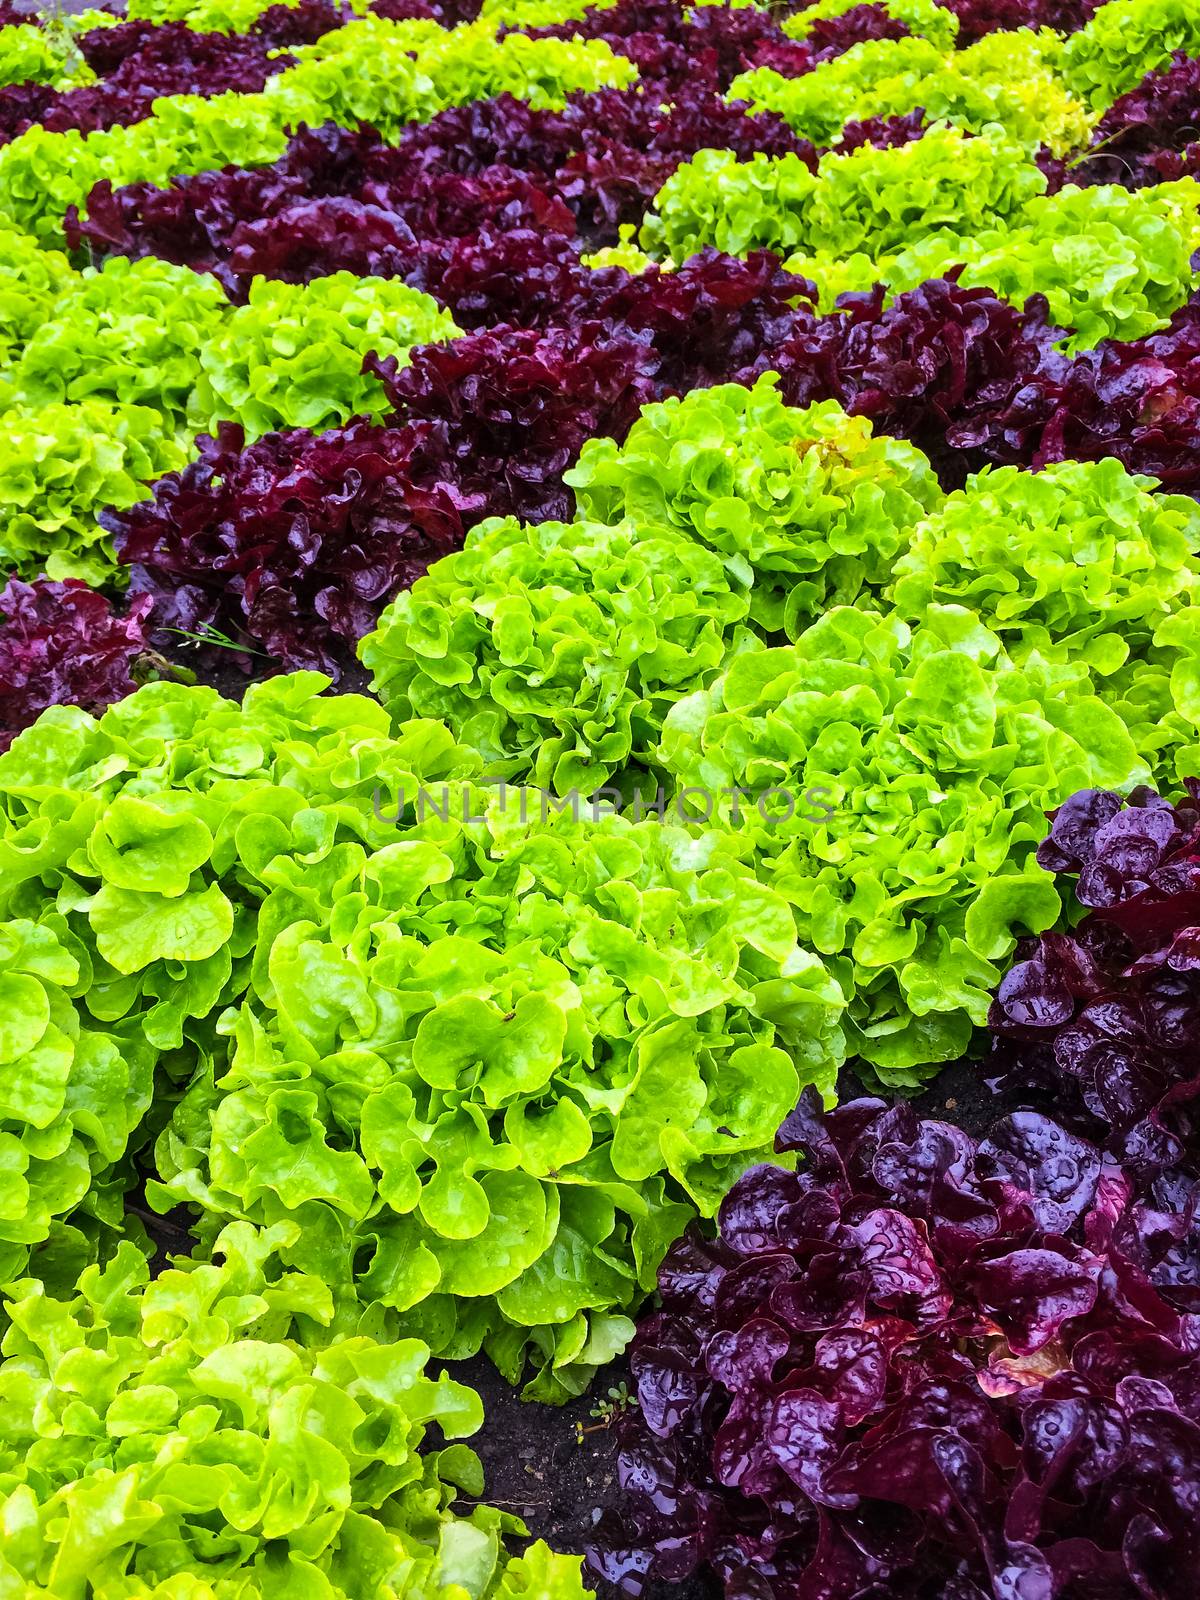 Bright green and red lettuce growing in the summer garden.